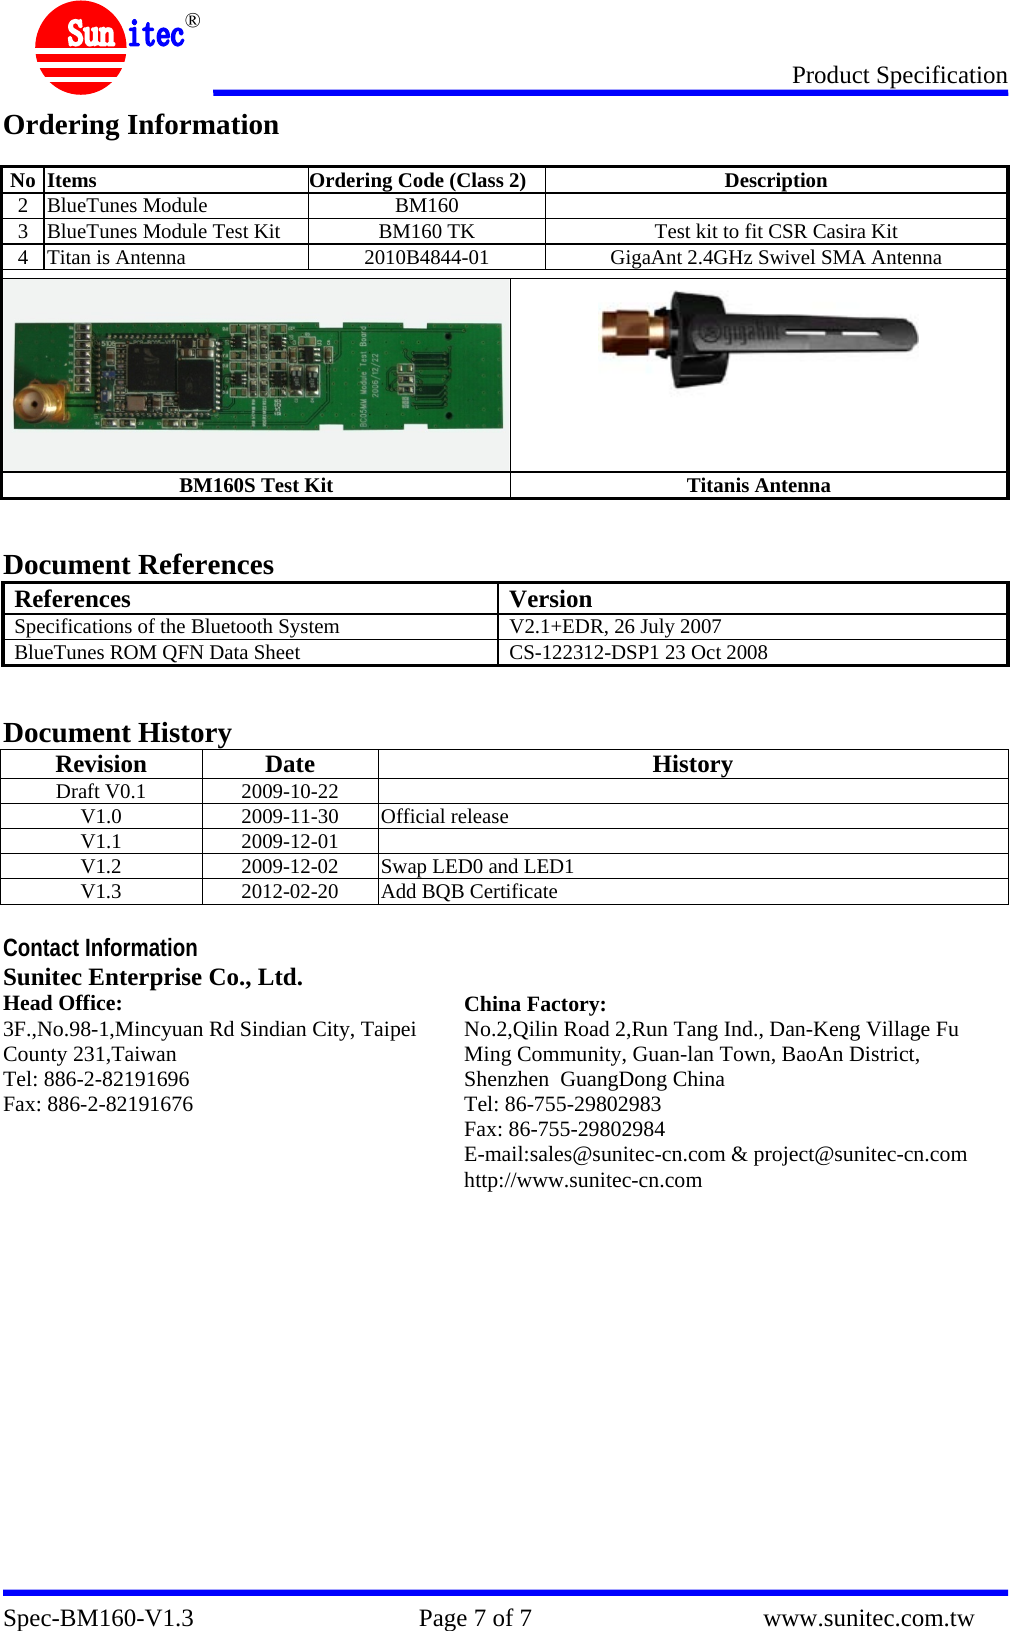 Product Specification Spec-BM160-V1.3                                    Page 7 of 7                                     www.sunitec.com.tw  ® Ordering Information  No  Items  Ordering Code (Class 2) Description 2 BlueTunes Module  BM160   3  BlueTunes Module Test Kit  BM160 TK  Test kit to fit CSR Casira Kit 4  Titan is Antenna  2010B4844-01  GigaAnt 2.4GHz Swivel SMA Antenna    BM160S Test Kit  Titanis Antenna   Document References References Version Specifications of the Bluetooth System  V2.1+EDR, 26 July 2007 BlueTunes ROM QFN Data Sheet  CS-122312-DSP1 23 Oct 2008   Document History Revision Date History Draft V0.1  2009-10-22   V1.0 2009-11-30 Official release V1.1 2009-12-01  V1.2  2009-12-02  Swap LED0 and LED1 V1.3  2012-02-20  Add BQB Certificate  Contact Information Sunitec Enterprise Co., Ltd.   Head Office: 3F.,No.98-1,Mincyuan Rd Sindian City, Taipei County 231,Taiwan Tel: 886-2-82191696 Fax: 886-2-82191676  China Factory: No.2,Qilin Road 2,Run Tang Ind., Dan-Keng Village Fu Ming Community, Guan-lan Town, BaoAn District, Shenzhen  GuangDong China Tel: 86-755-29802983 Fax: 86-755-29802984 E-mail:sales@sunitec-cn.com &amp; project@sunitec-cn.com http://www.sunitec-cn.com  